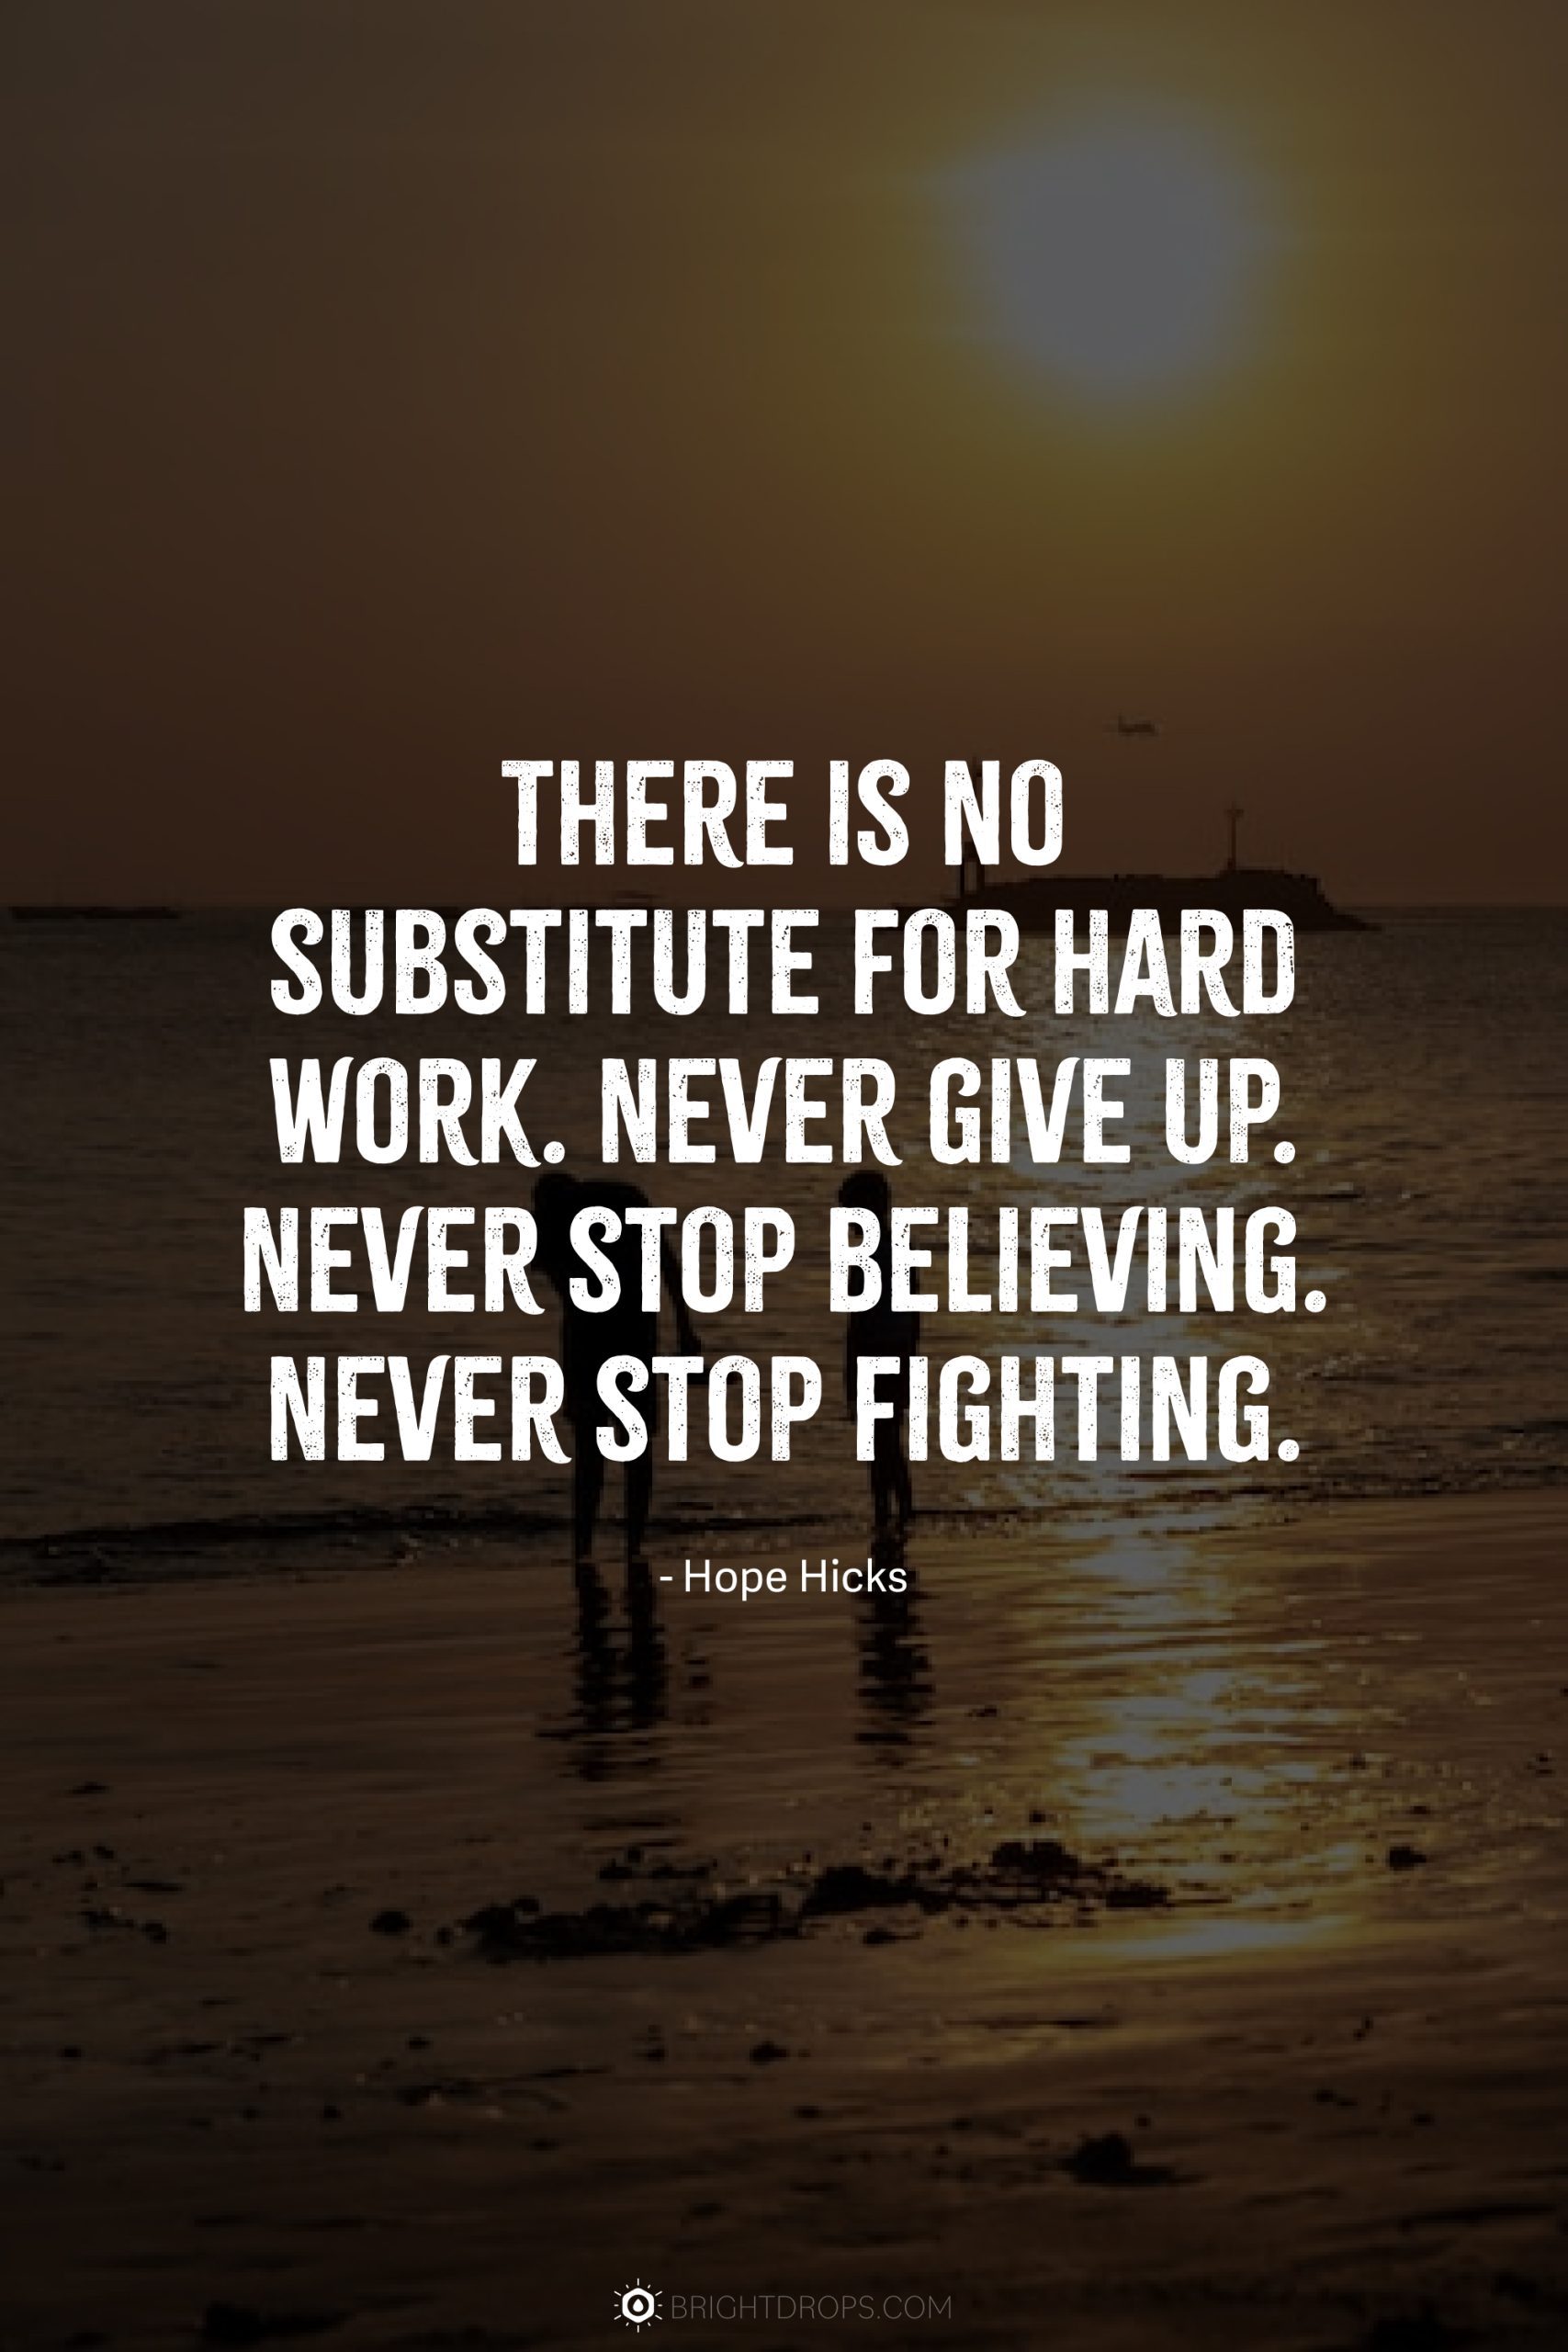 There is no substitute for hard work. Never give up. Never stop believing. Never stop fighting.